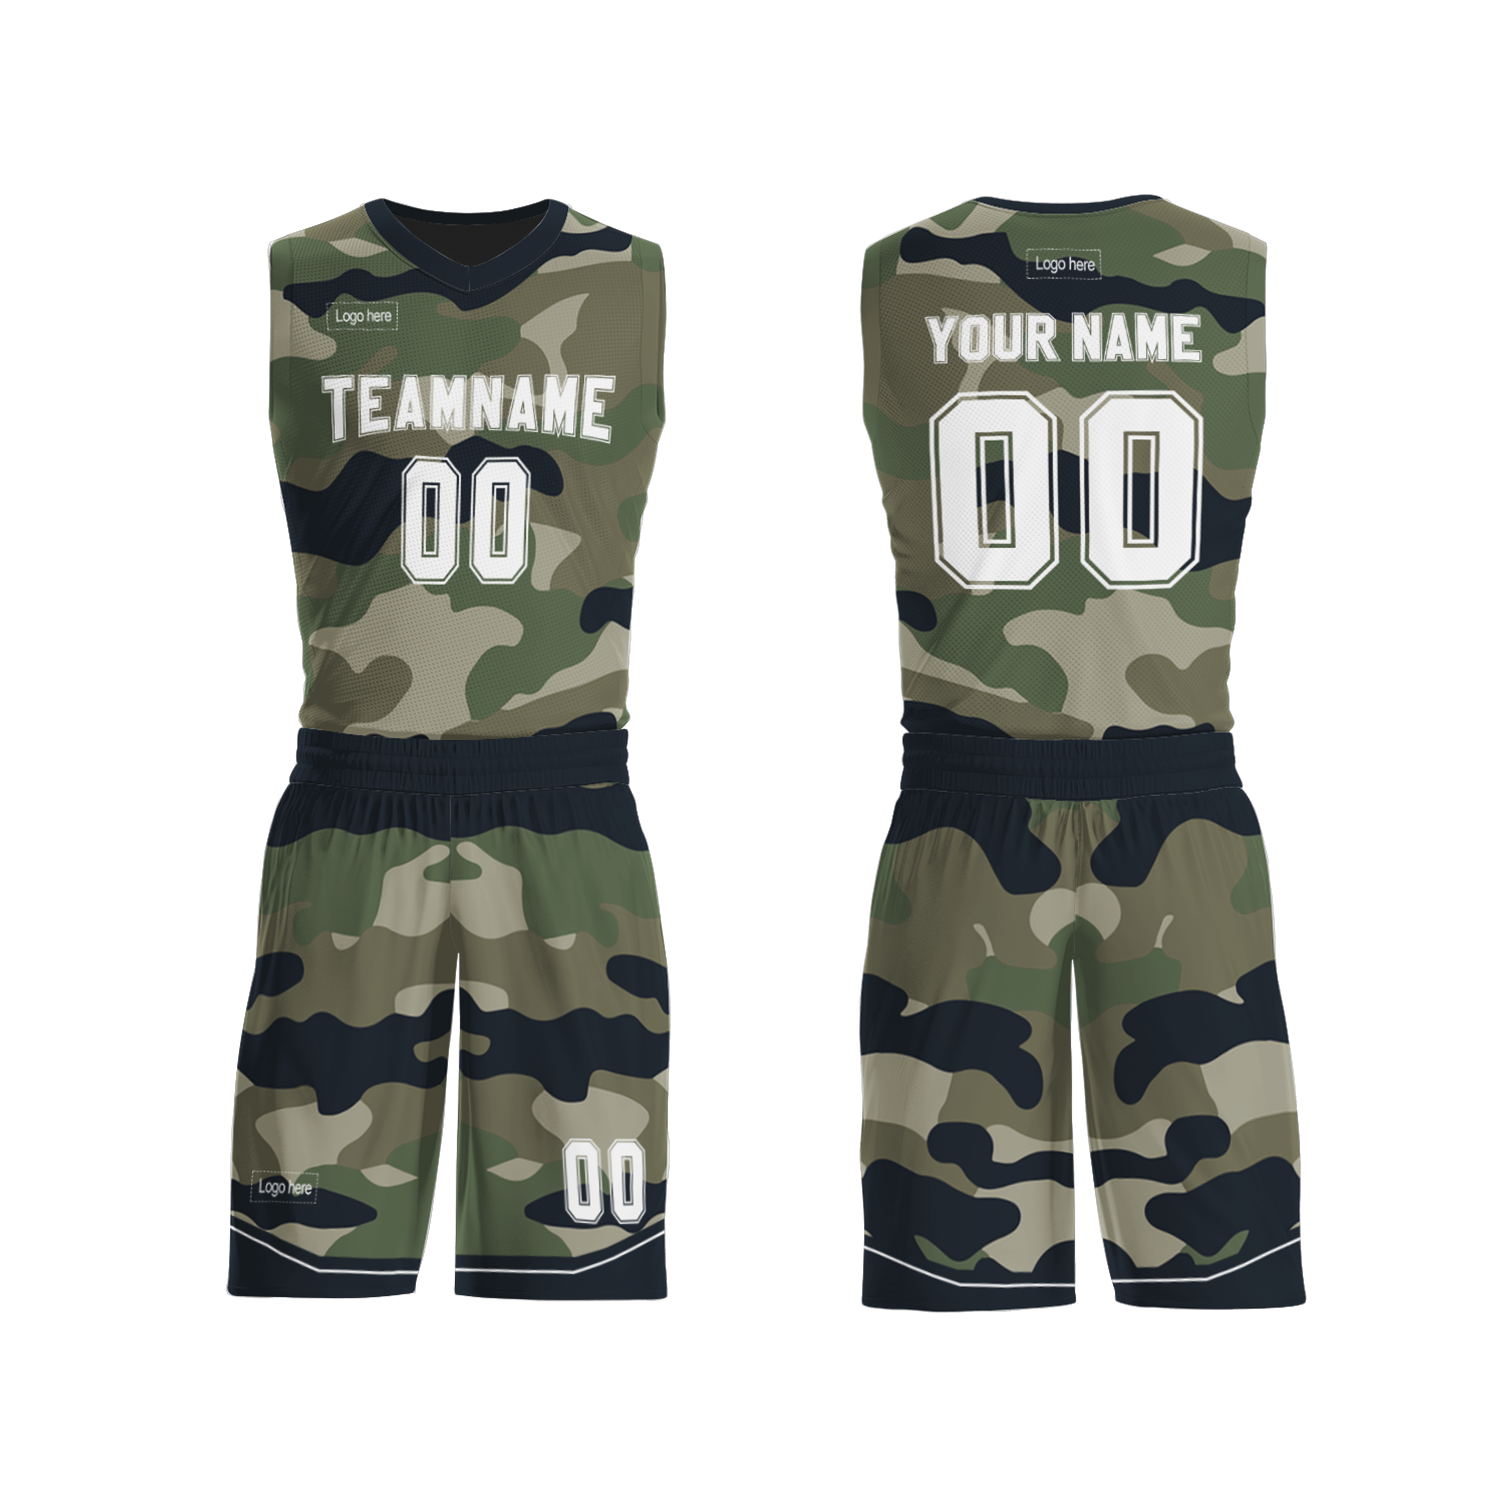 Customized Basketball Uniforms Personalized Design Printing Sport Clothes Summer Basketball Jerseys For Men